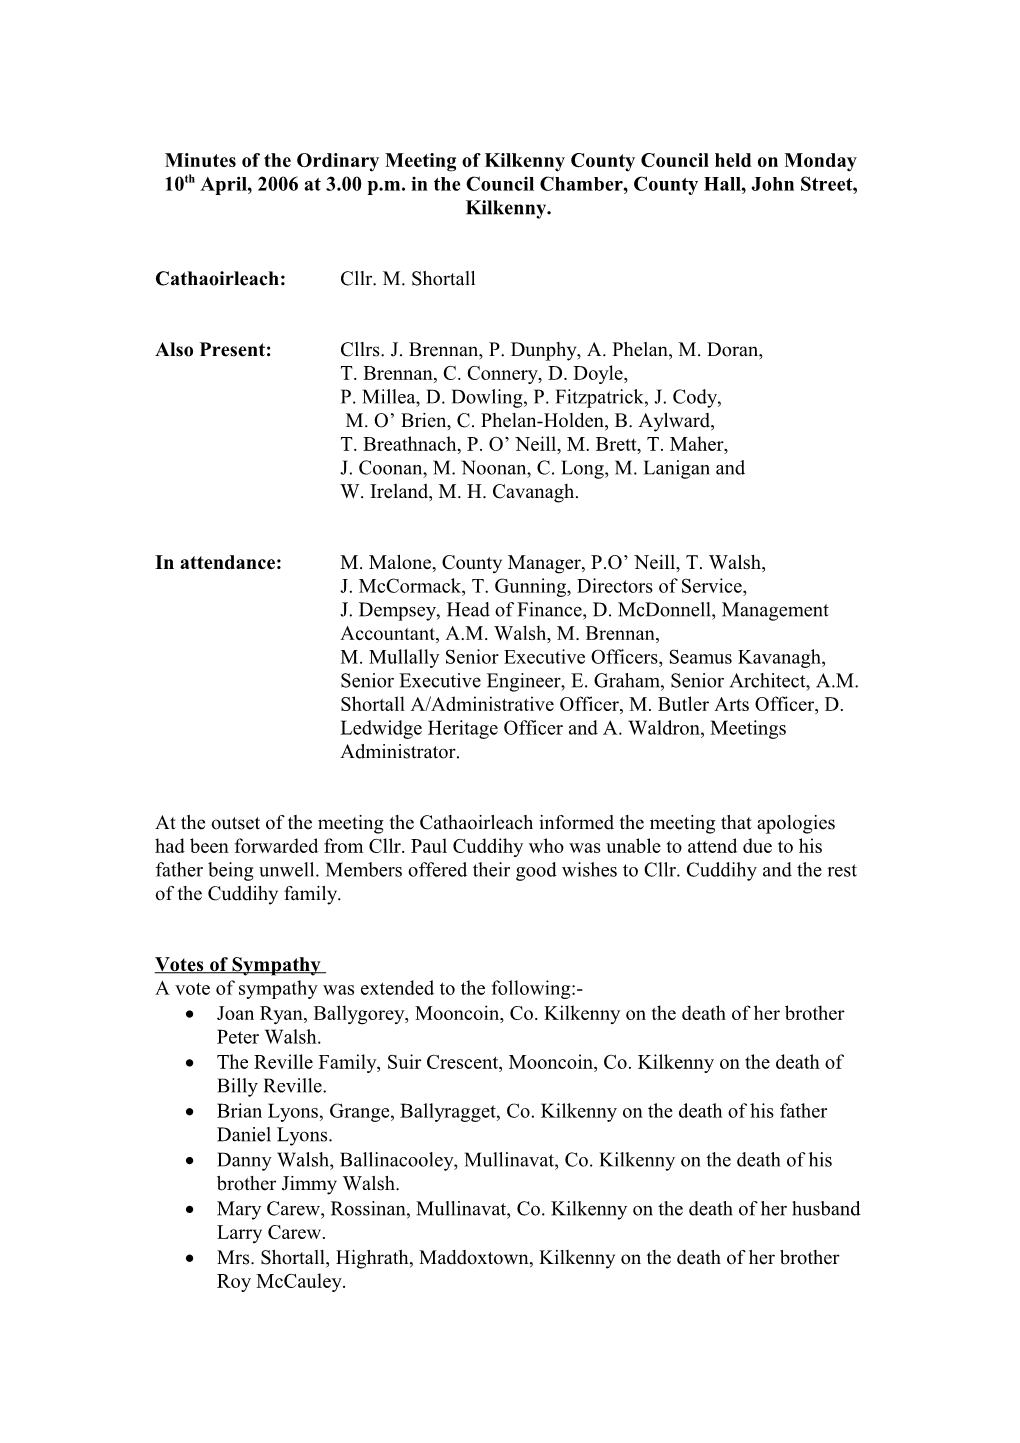 Minutes of the Ordinary Meeting of Kilkenny County Council Held on Monday 10Th April, 2006 at 3